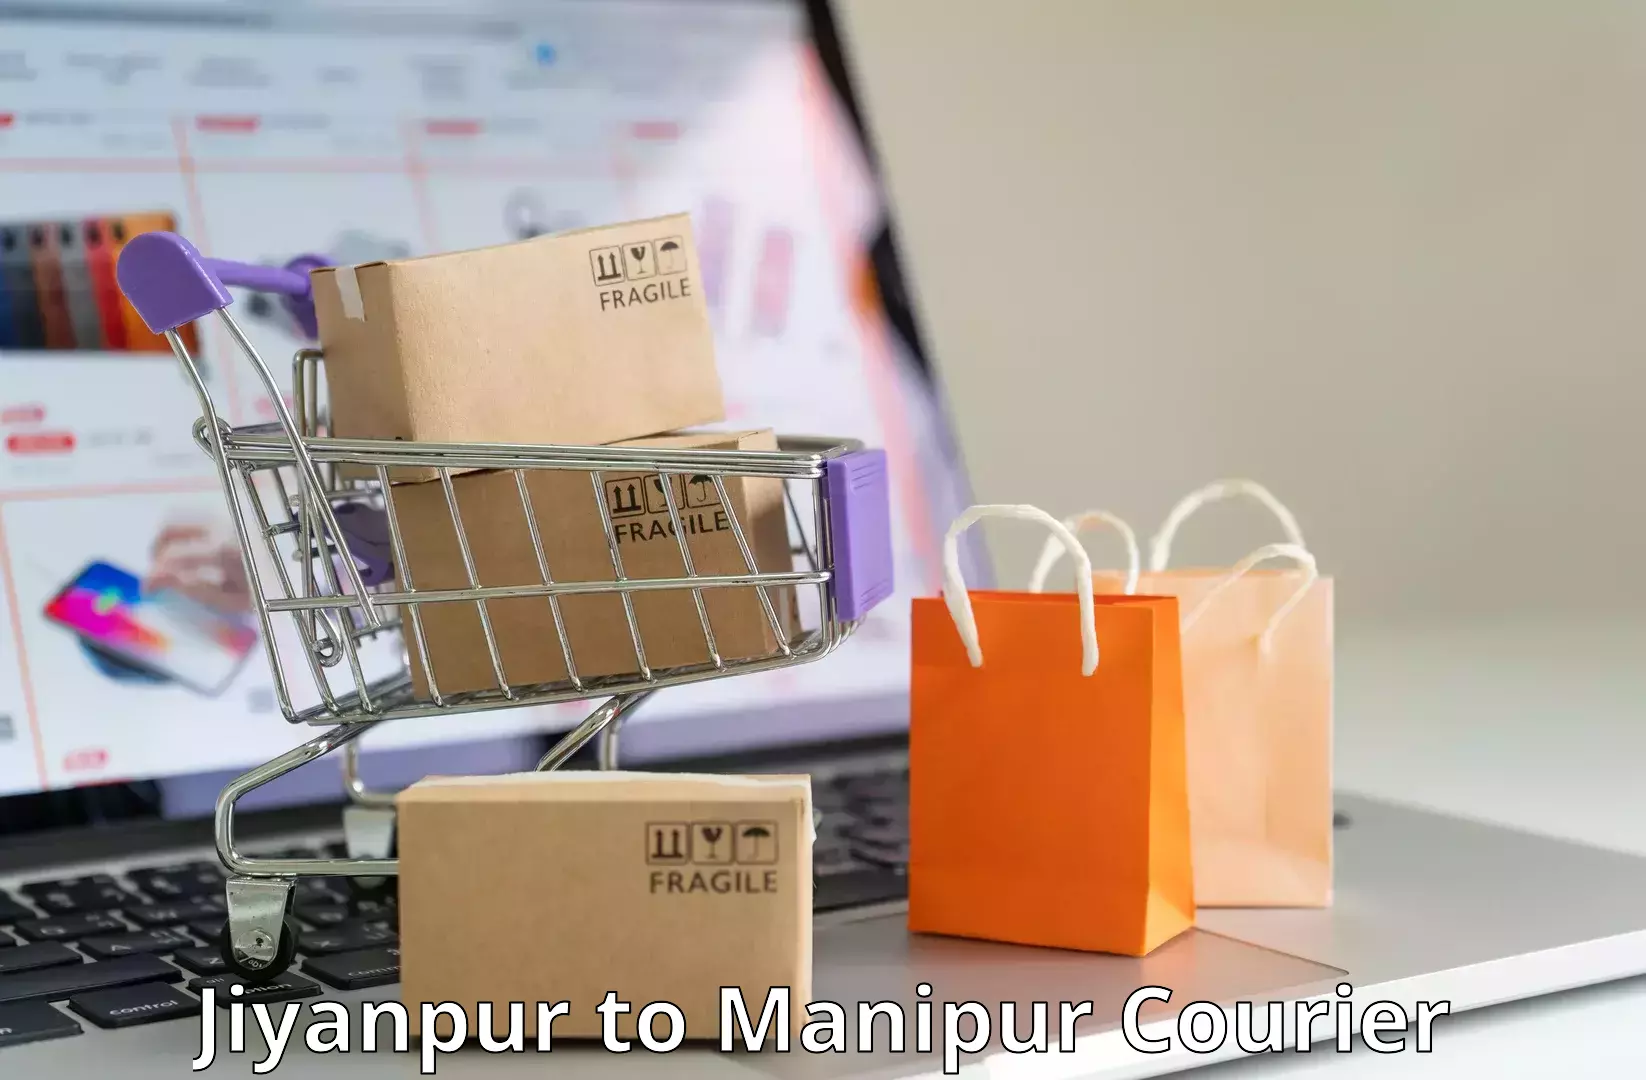 Next-generation courier services Jiyanpur to Chandel